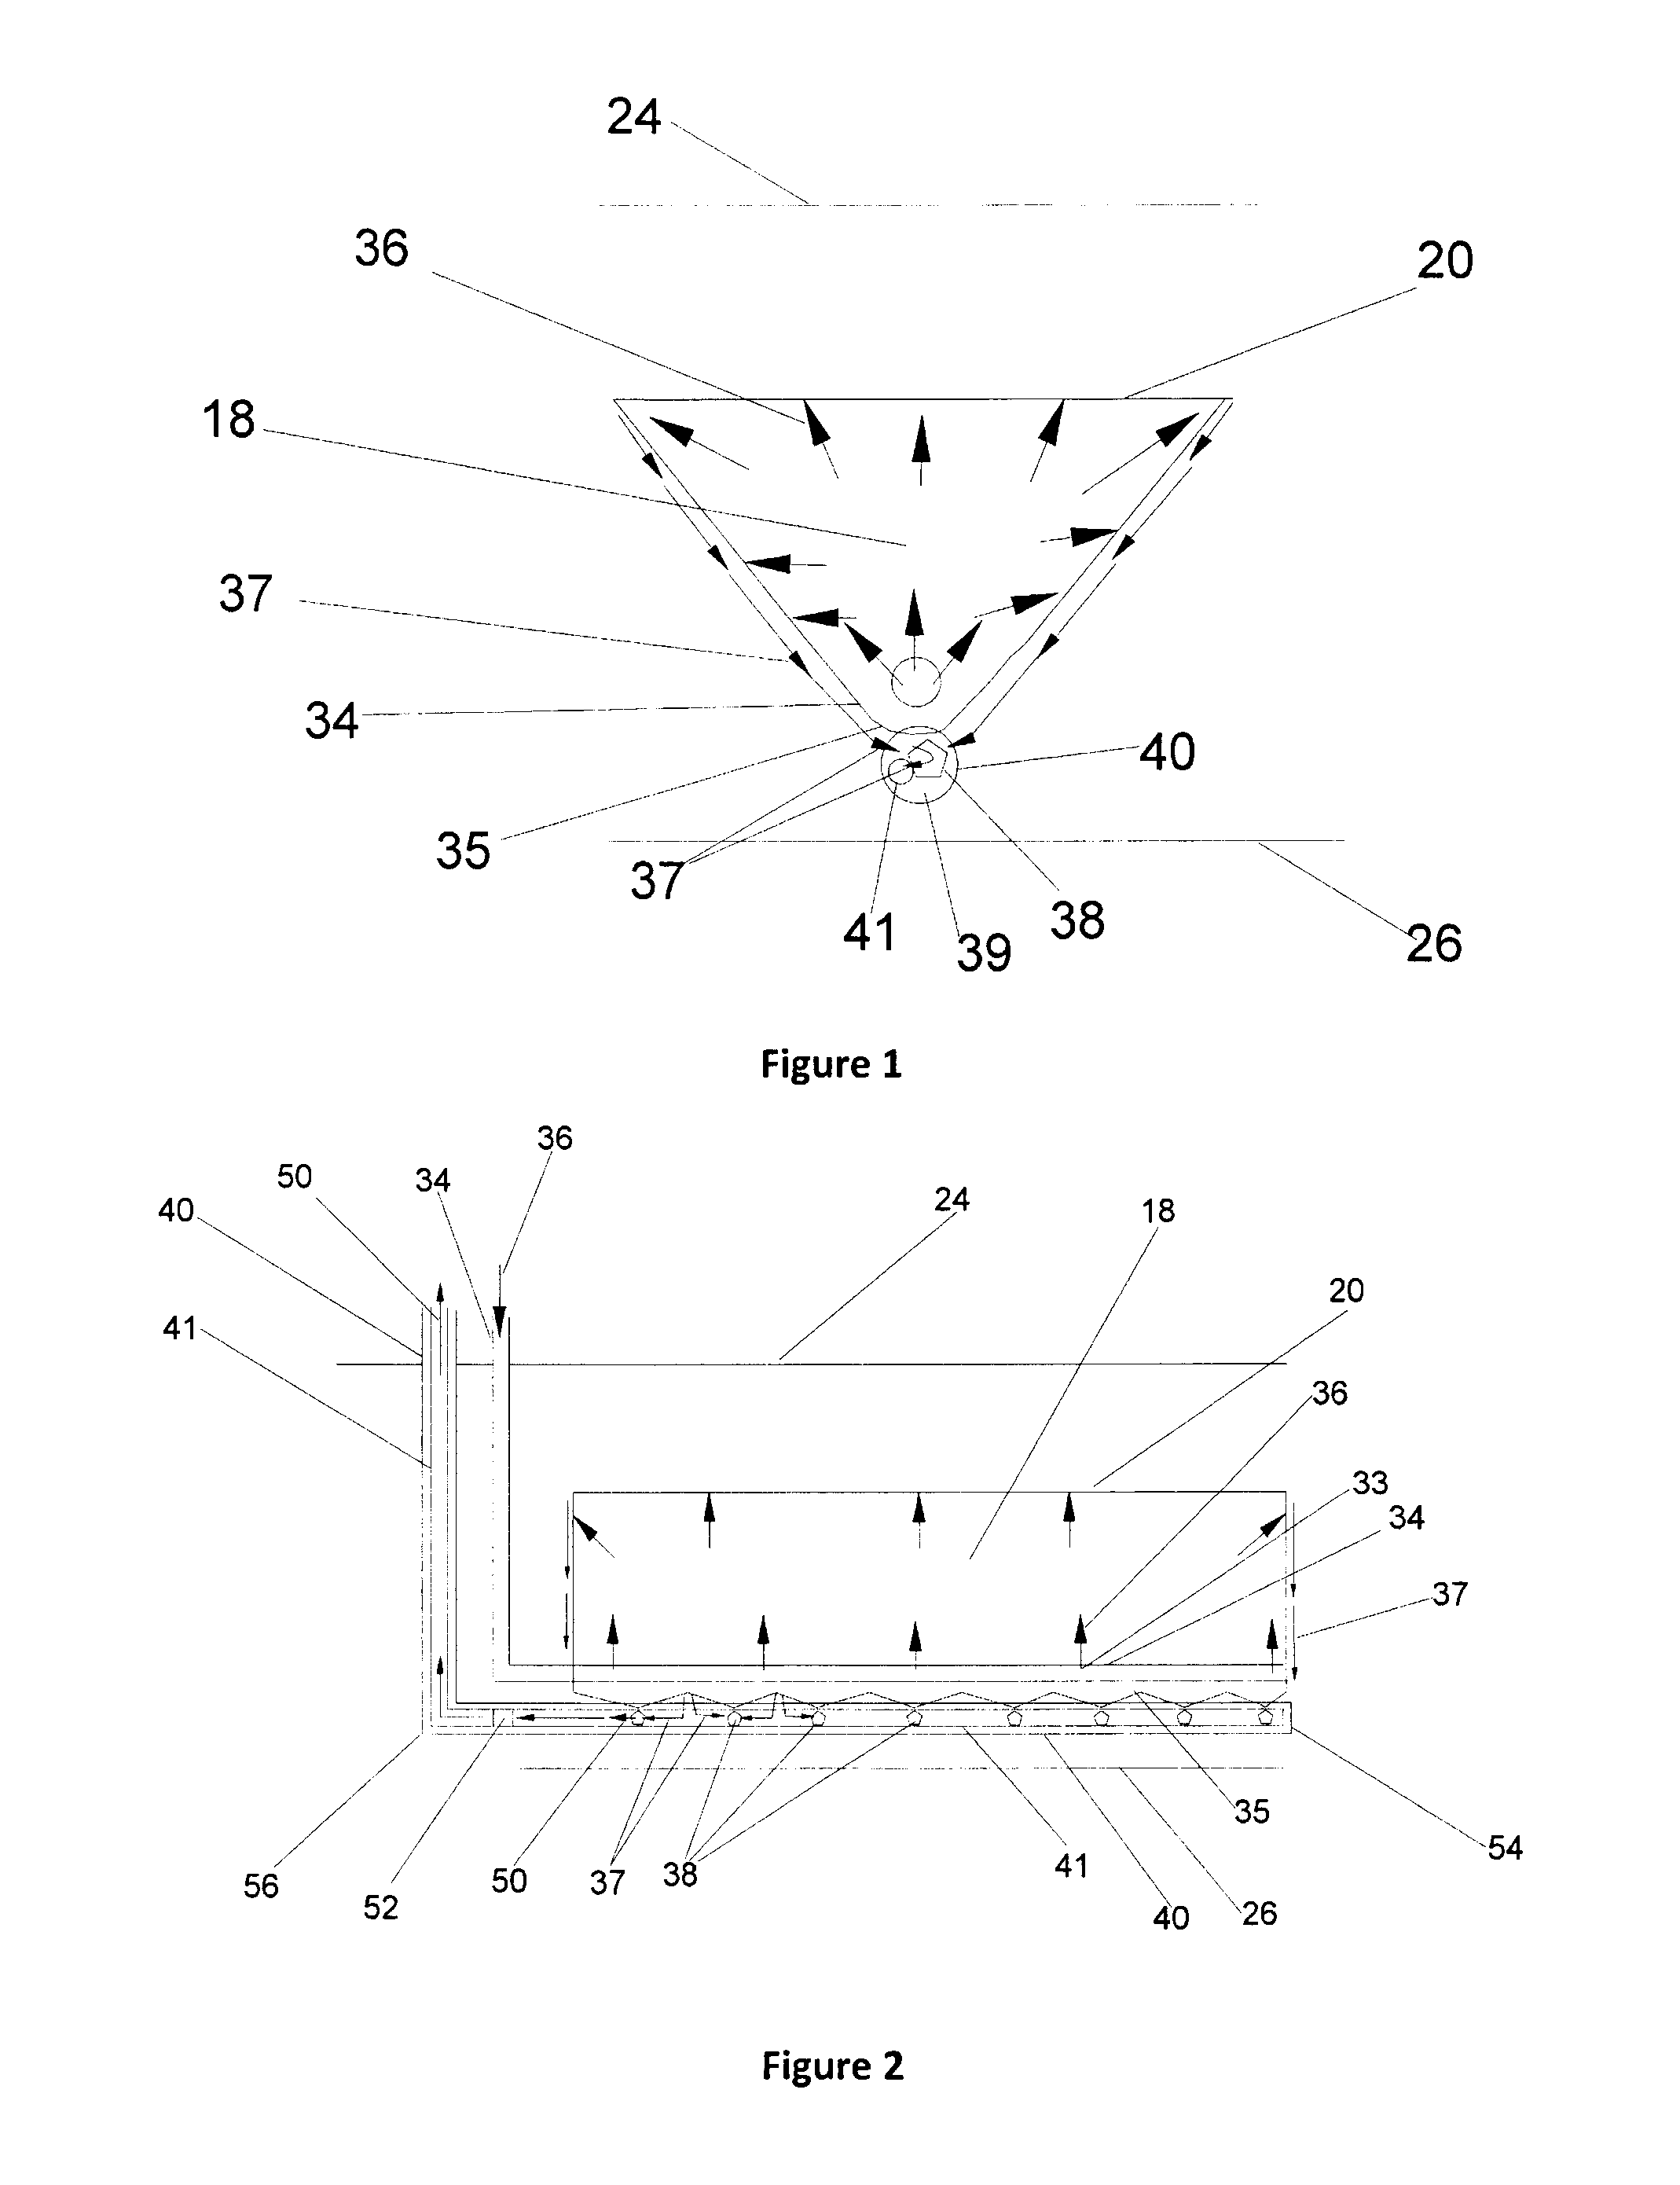 Inflow control valve for controlling the flow of fluids into a generally horizontal production well and method of using the same